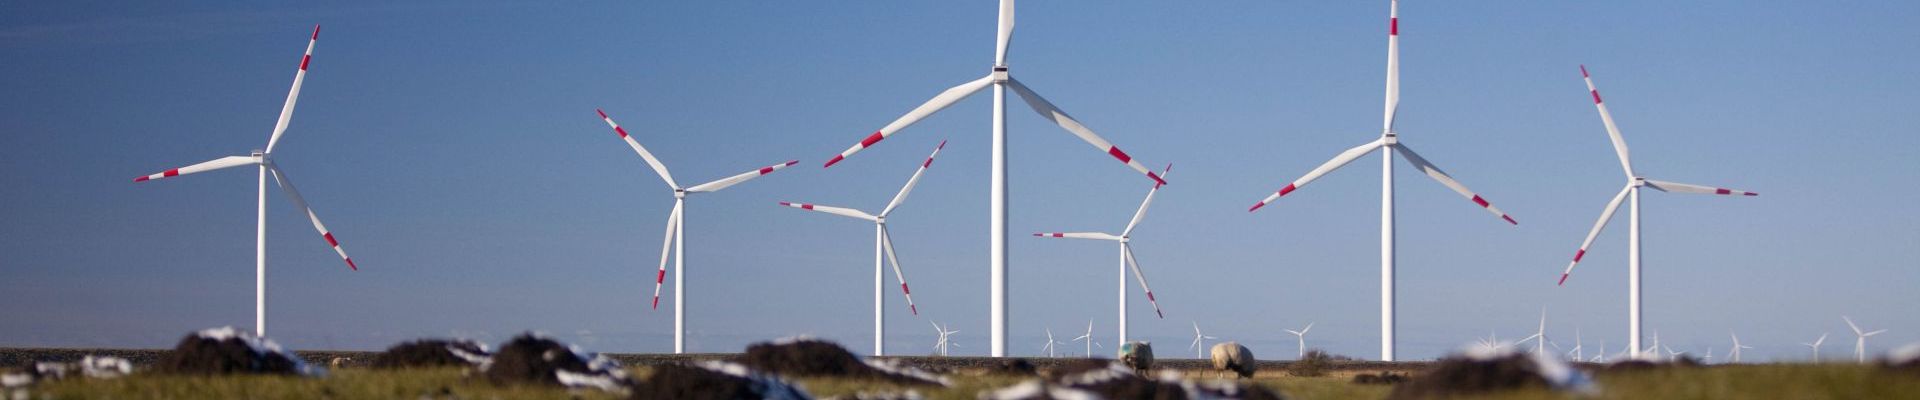 Wind farm in Germany provides ancillary services via virtual power plant